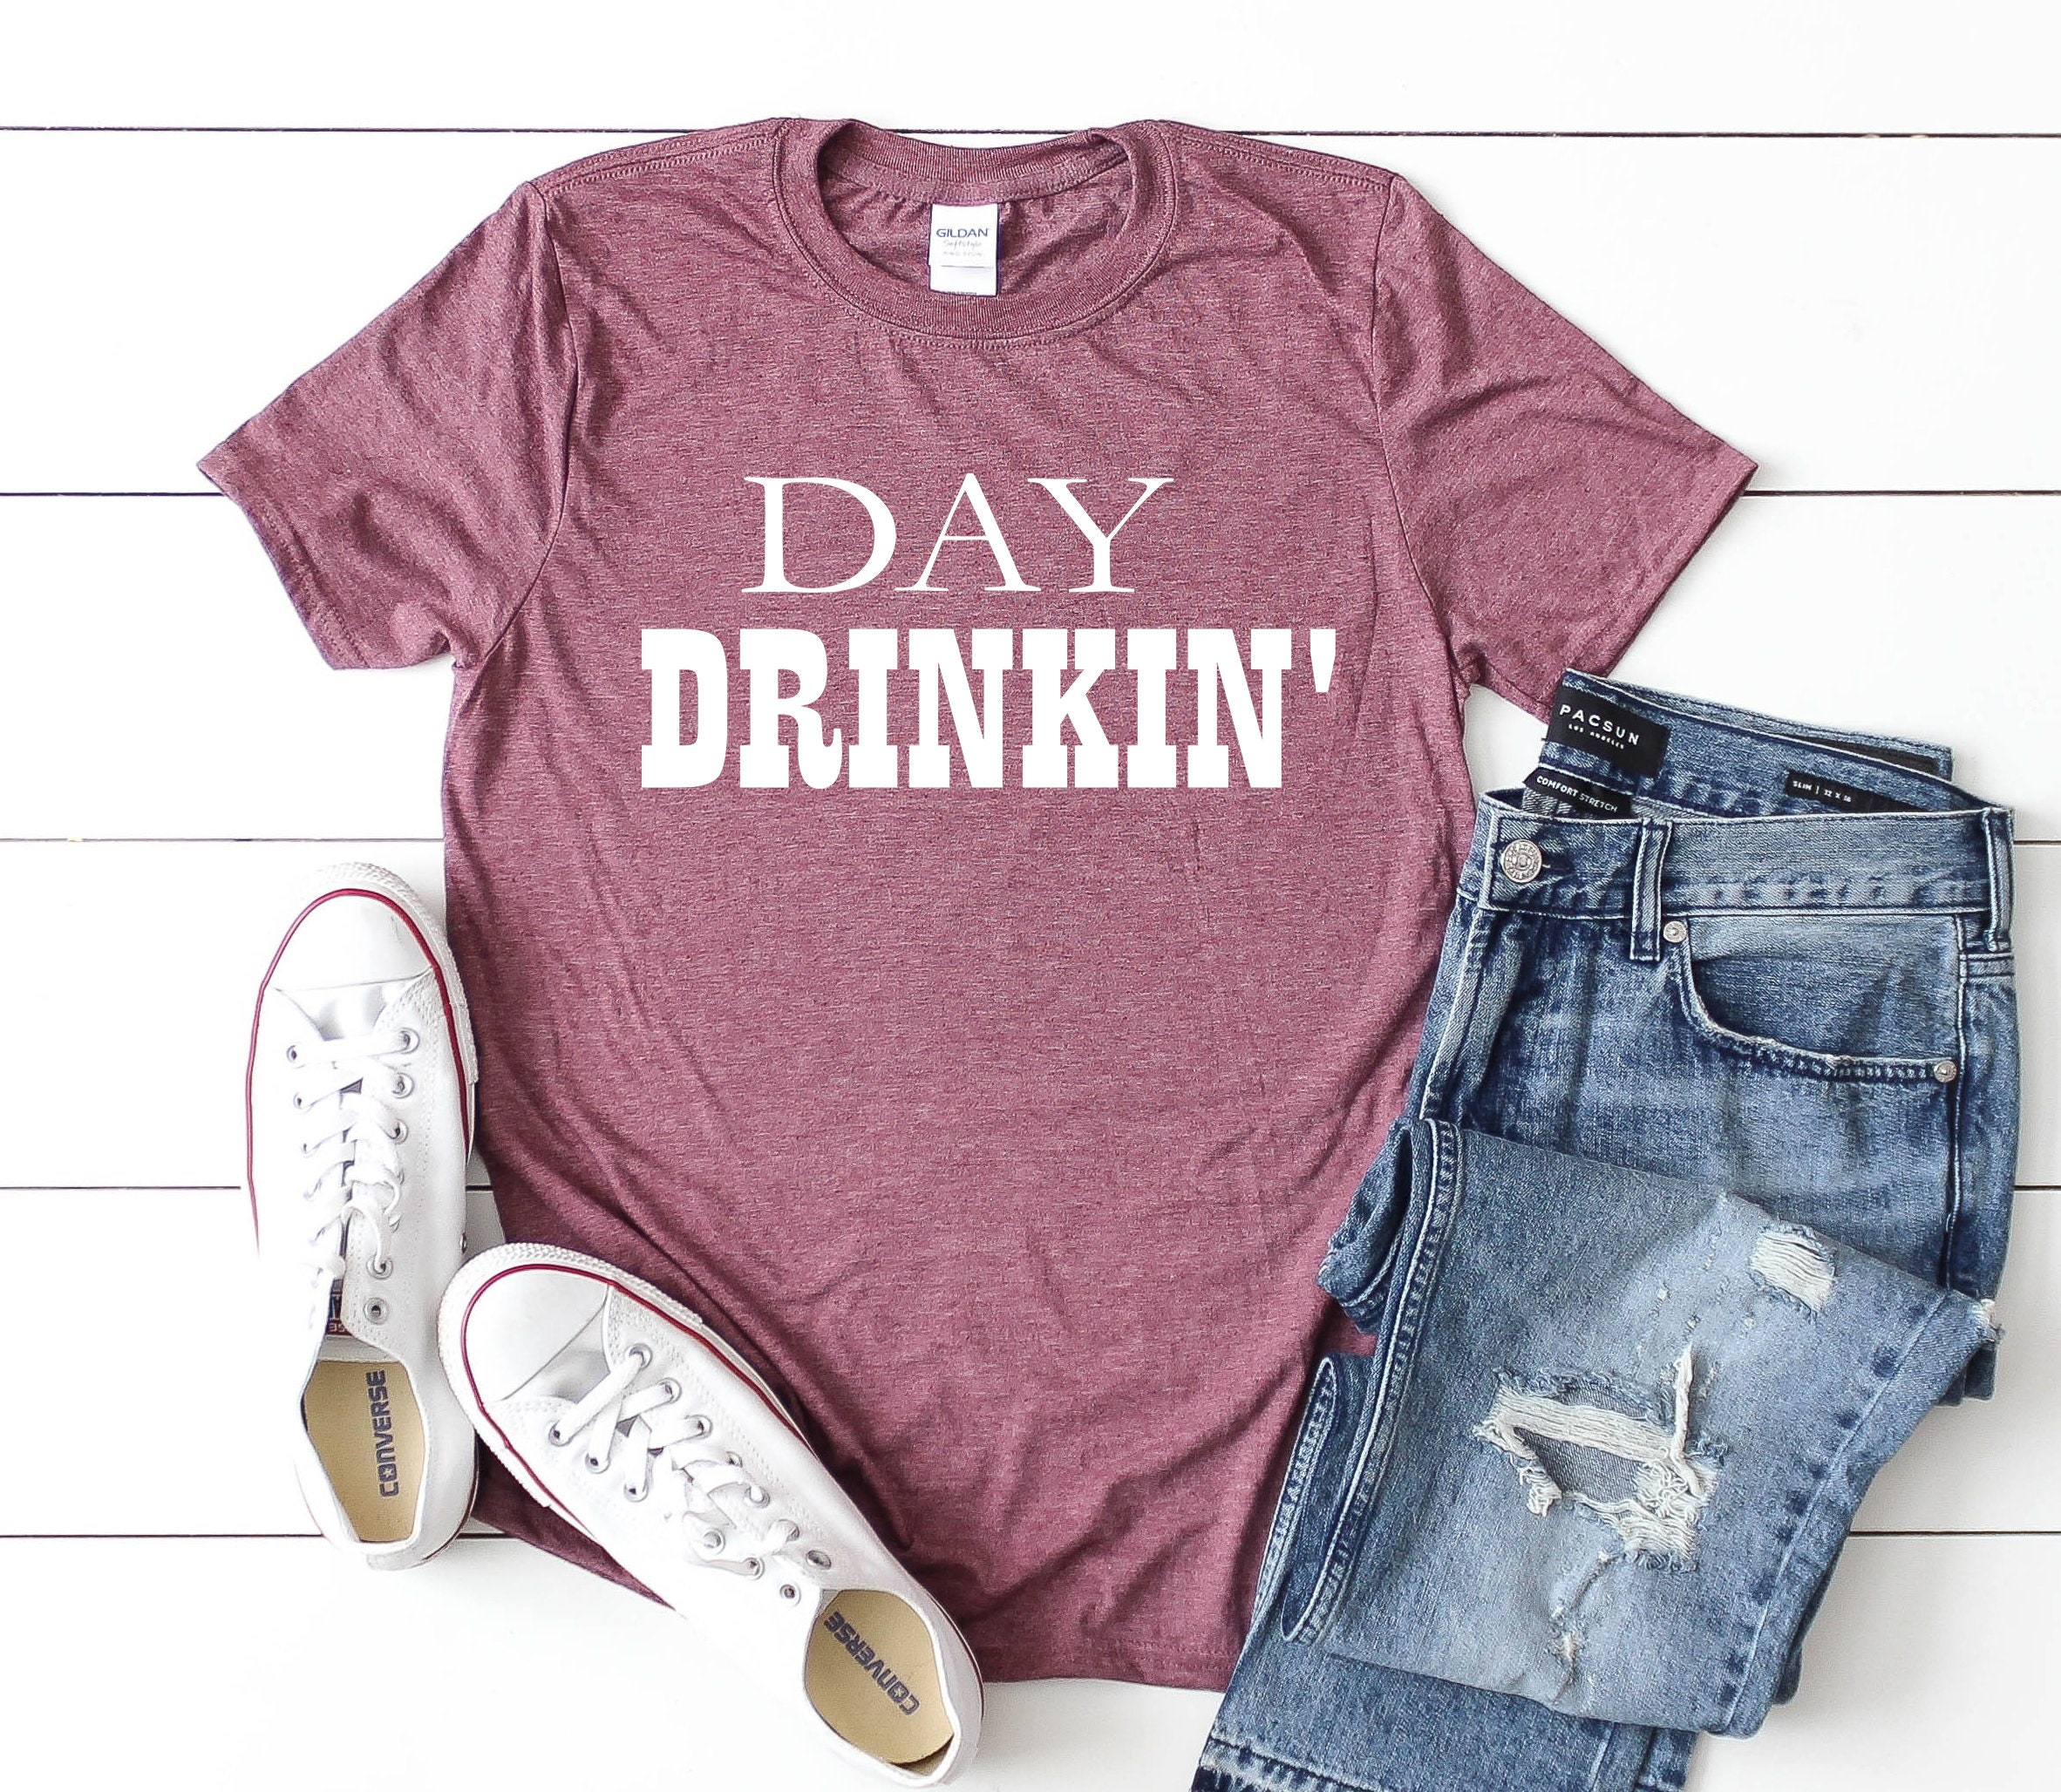 Day Drinkin Shirt Day Drinking Shirt Shirts for Drinkers | Etsy